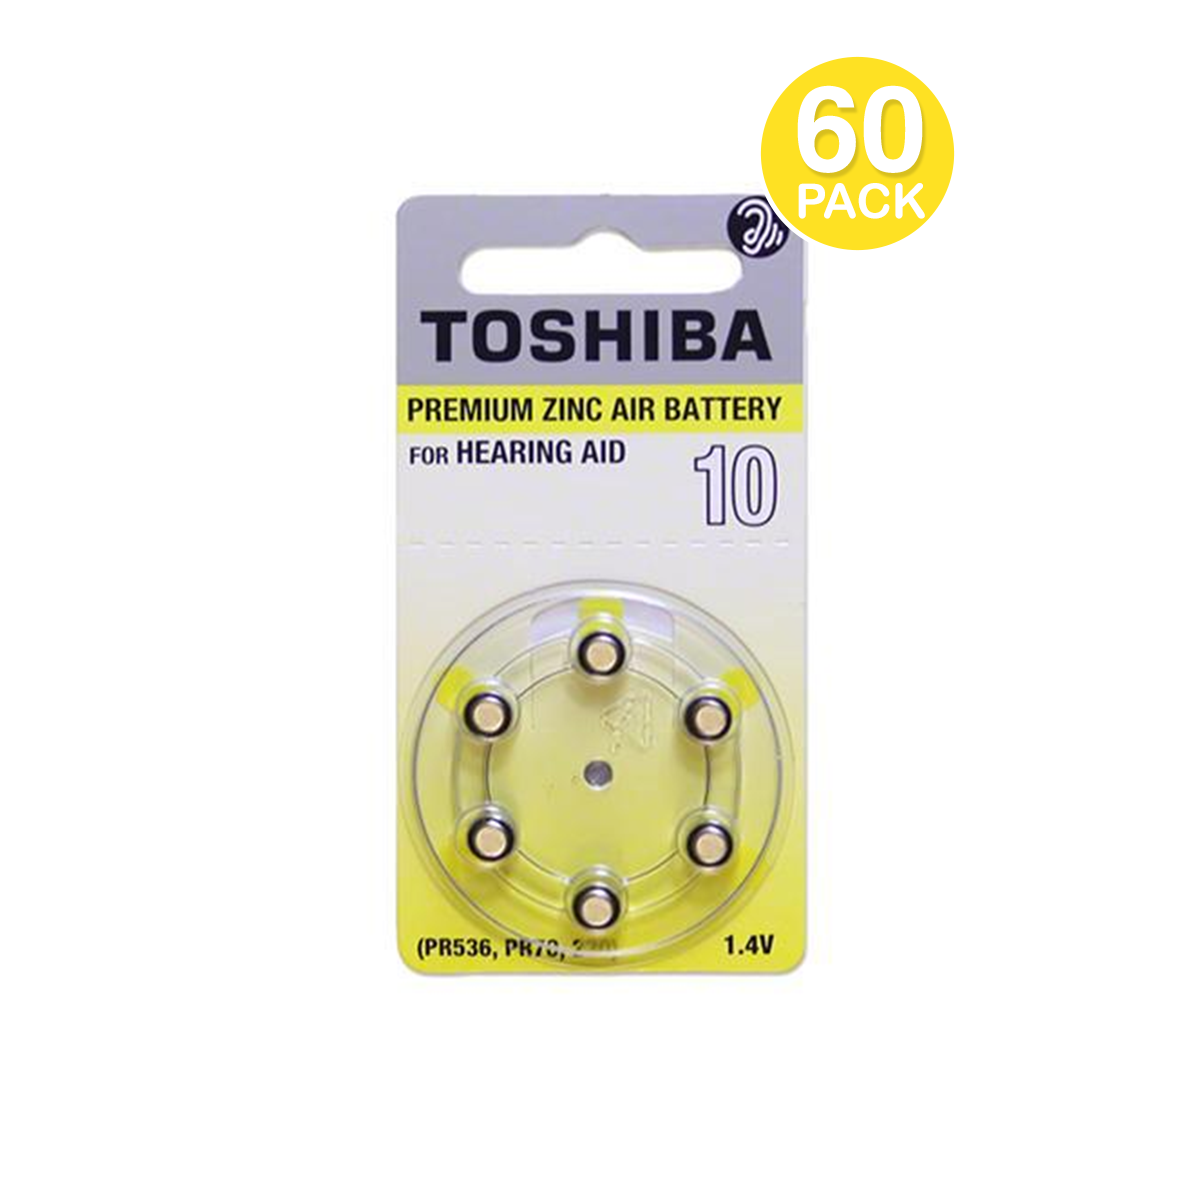 Toshiba Hearing Aid Batteries, Size 10, Dial Card/6, 60 Pcs